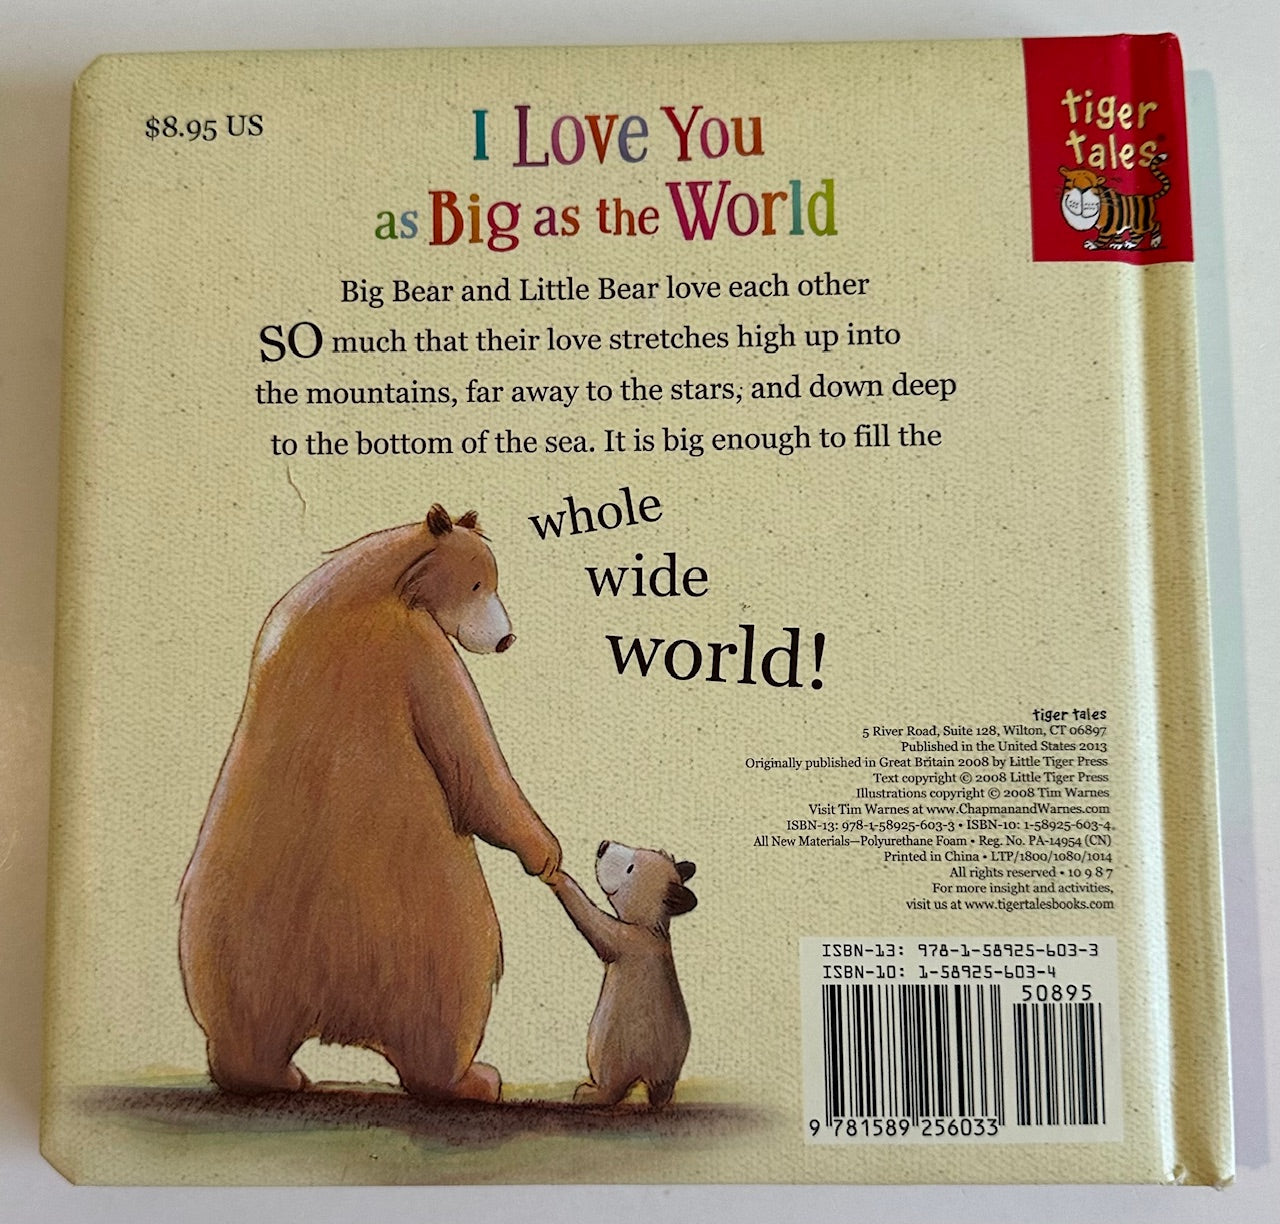 "I Love You as Big as the World"